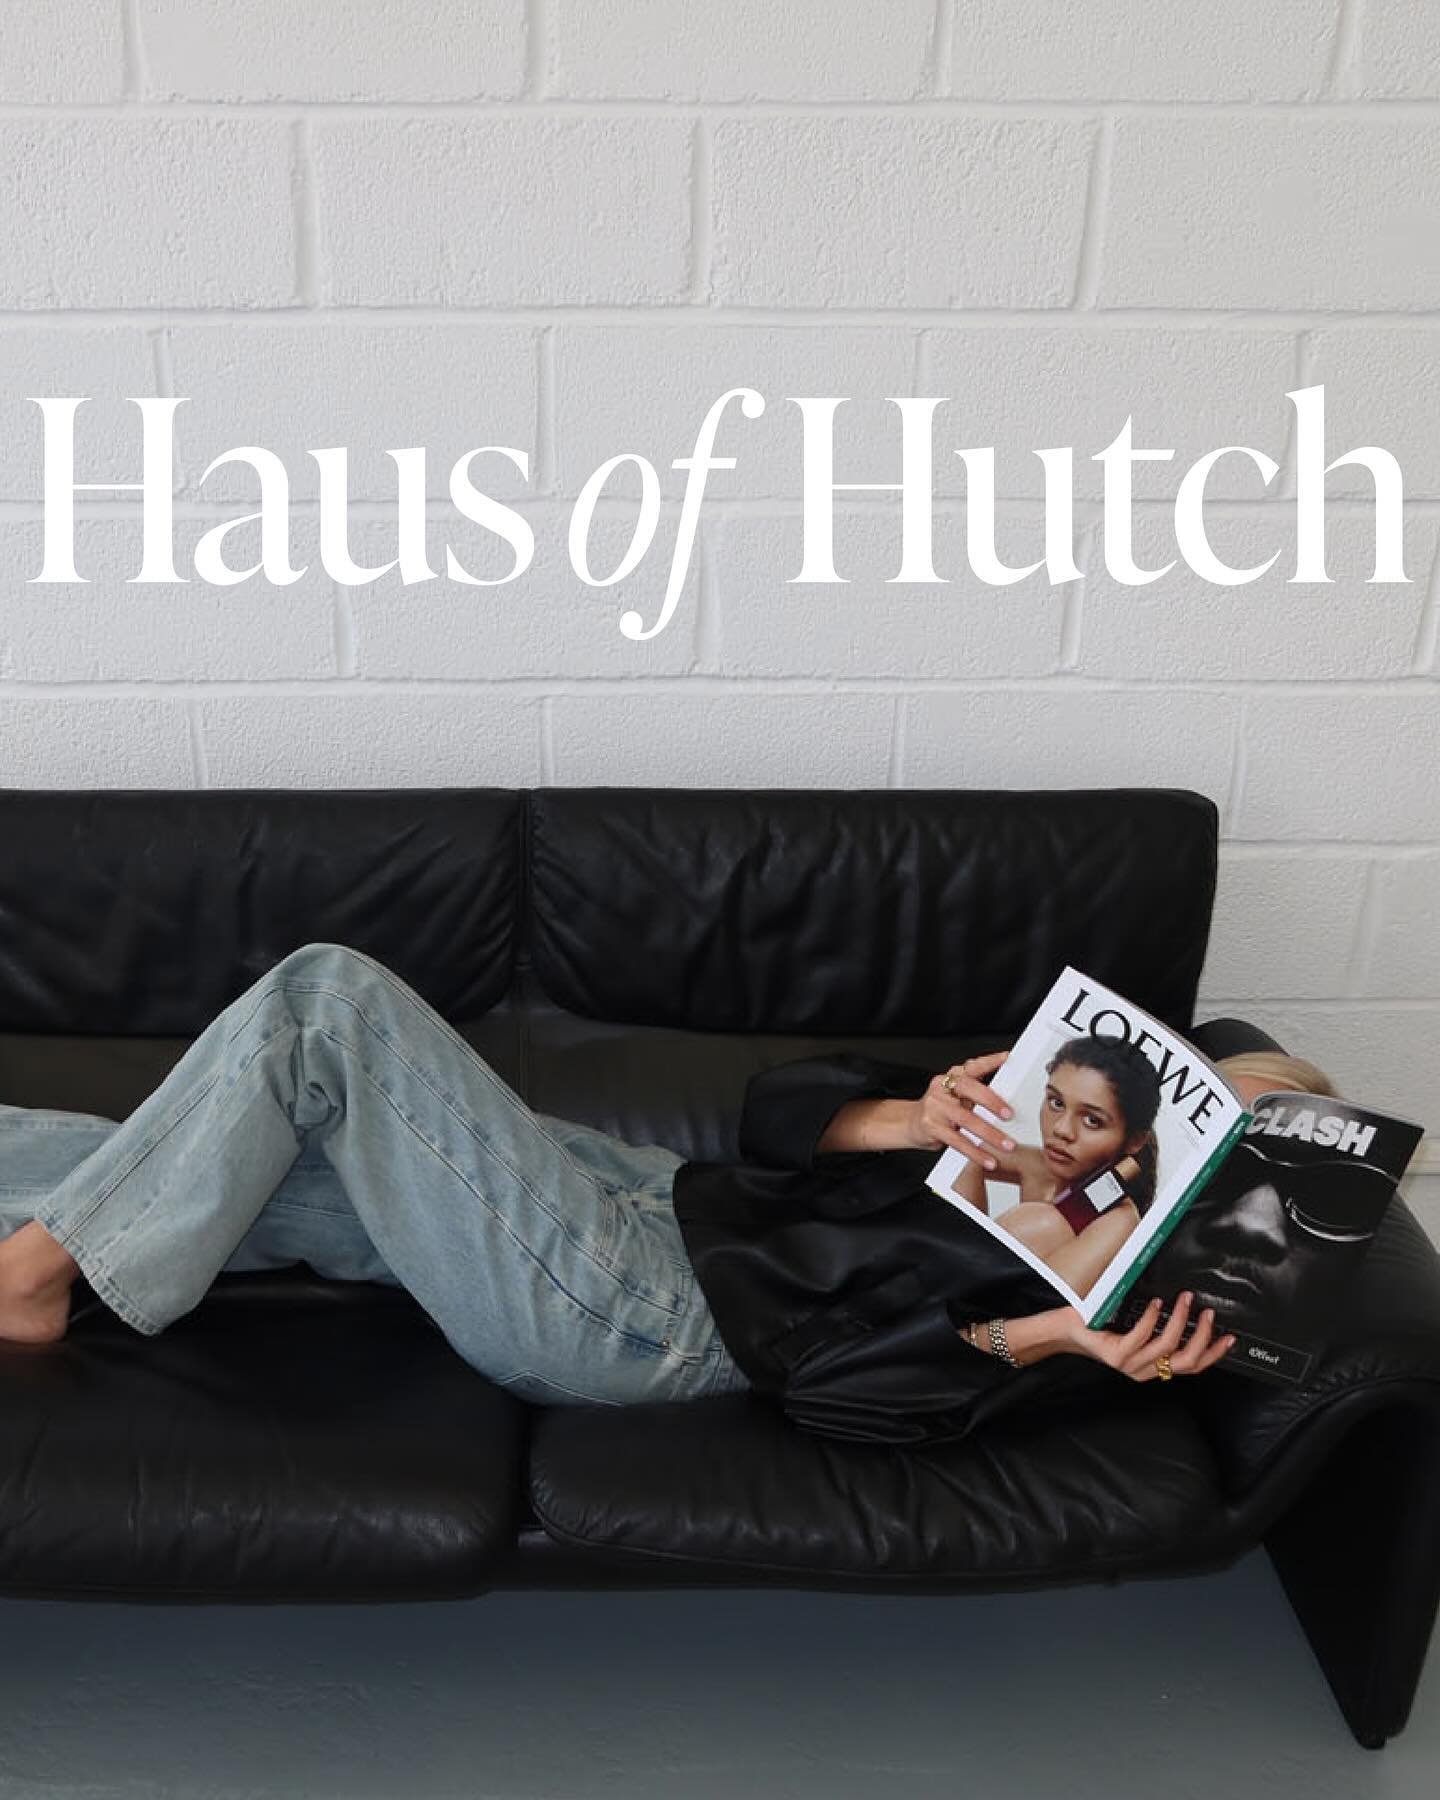 Surreal doesn&rsquo;t even begin to describe it!

We&rsquo;re thrilled to announce the launch of our sister business @hausofhutch 📸

Crafting the brand identity and website was a journey in itself (designing for your own business is so much harder t